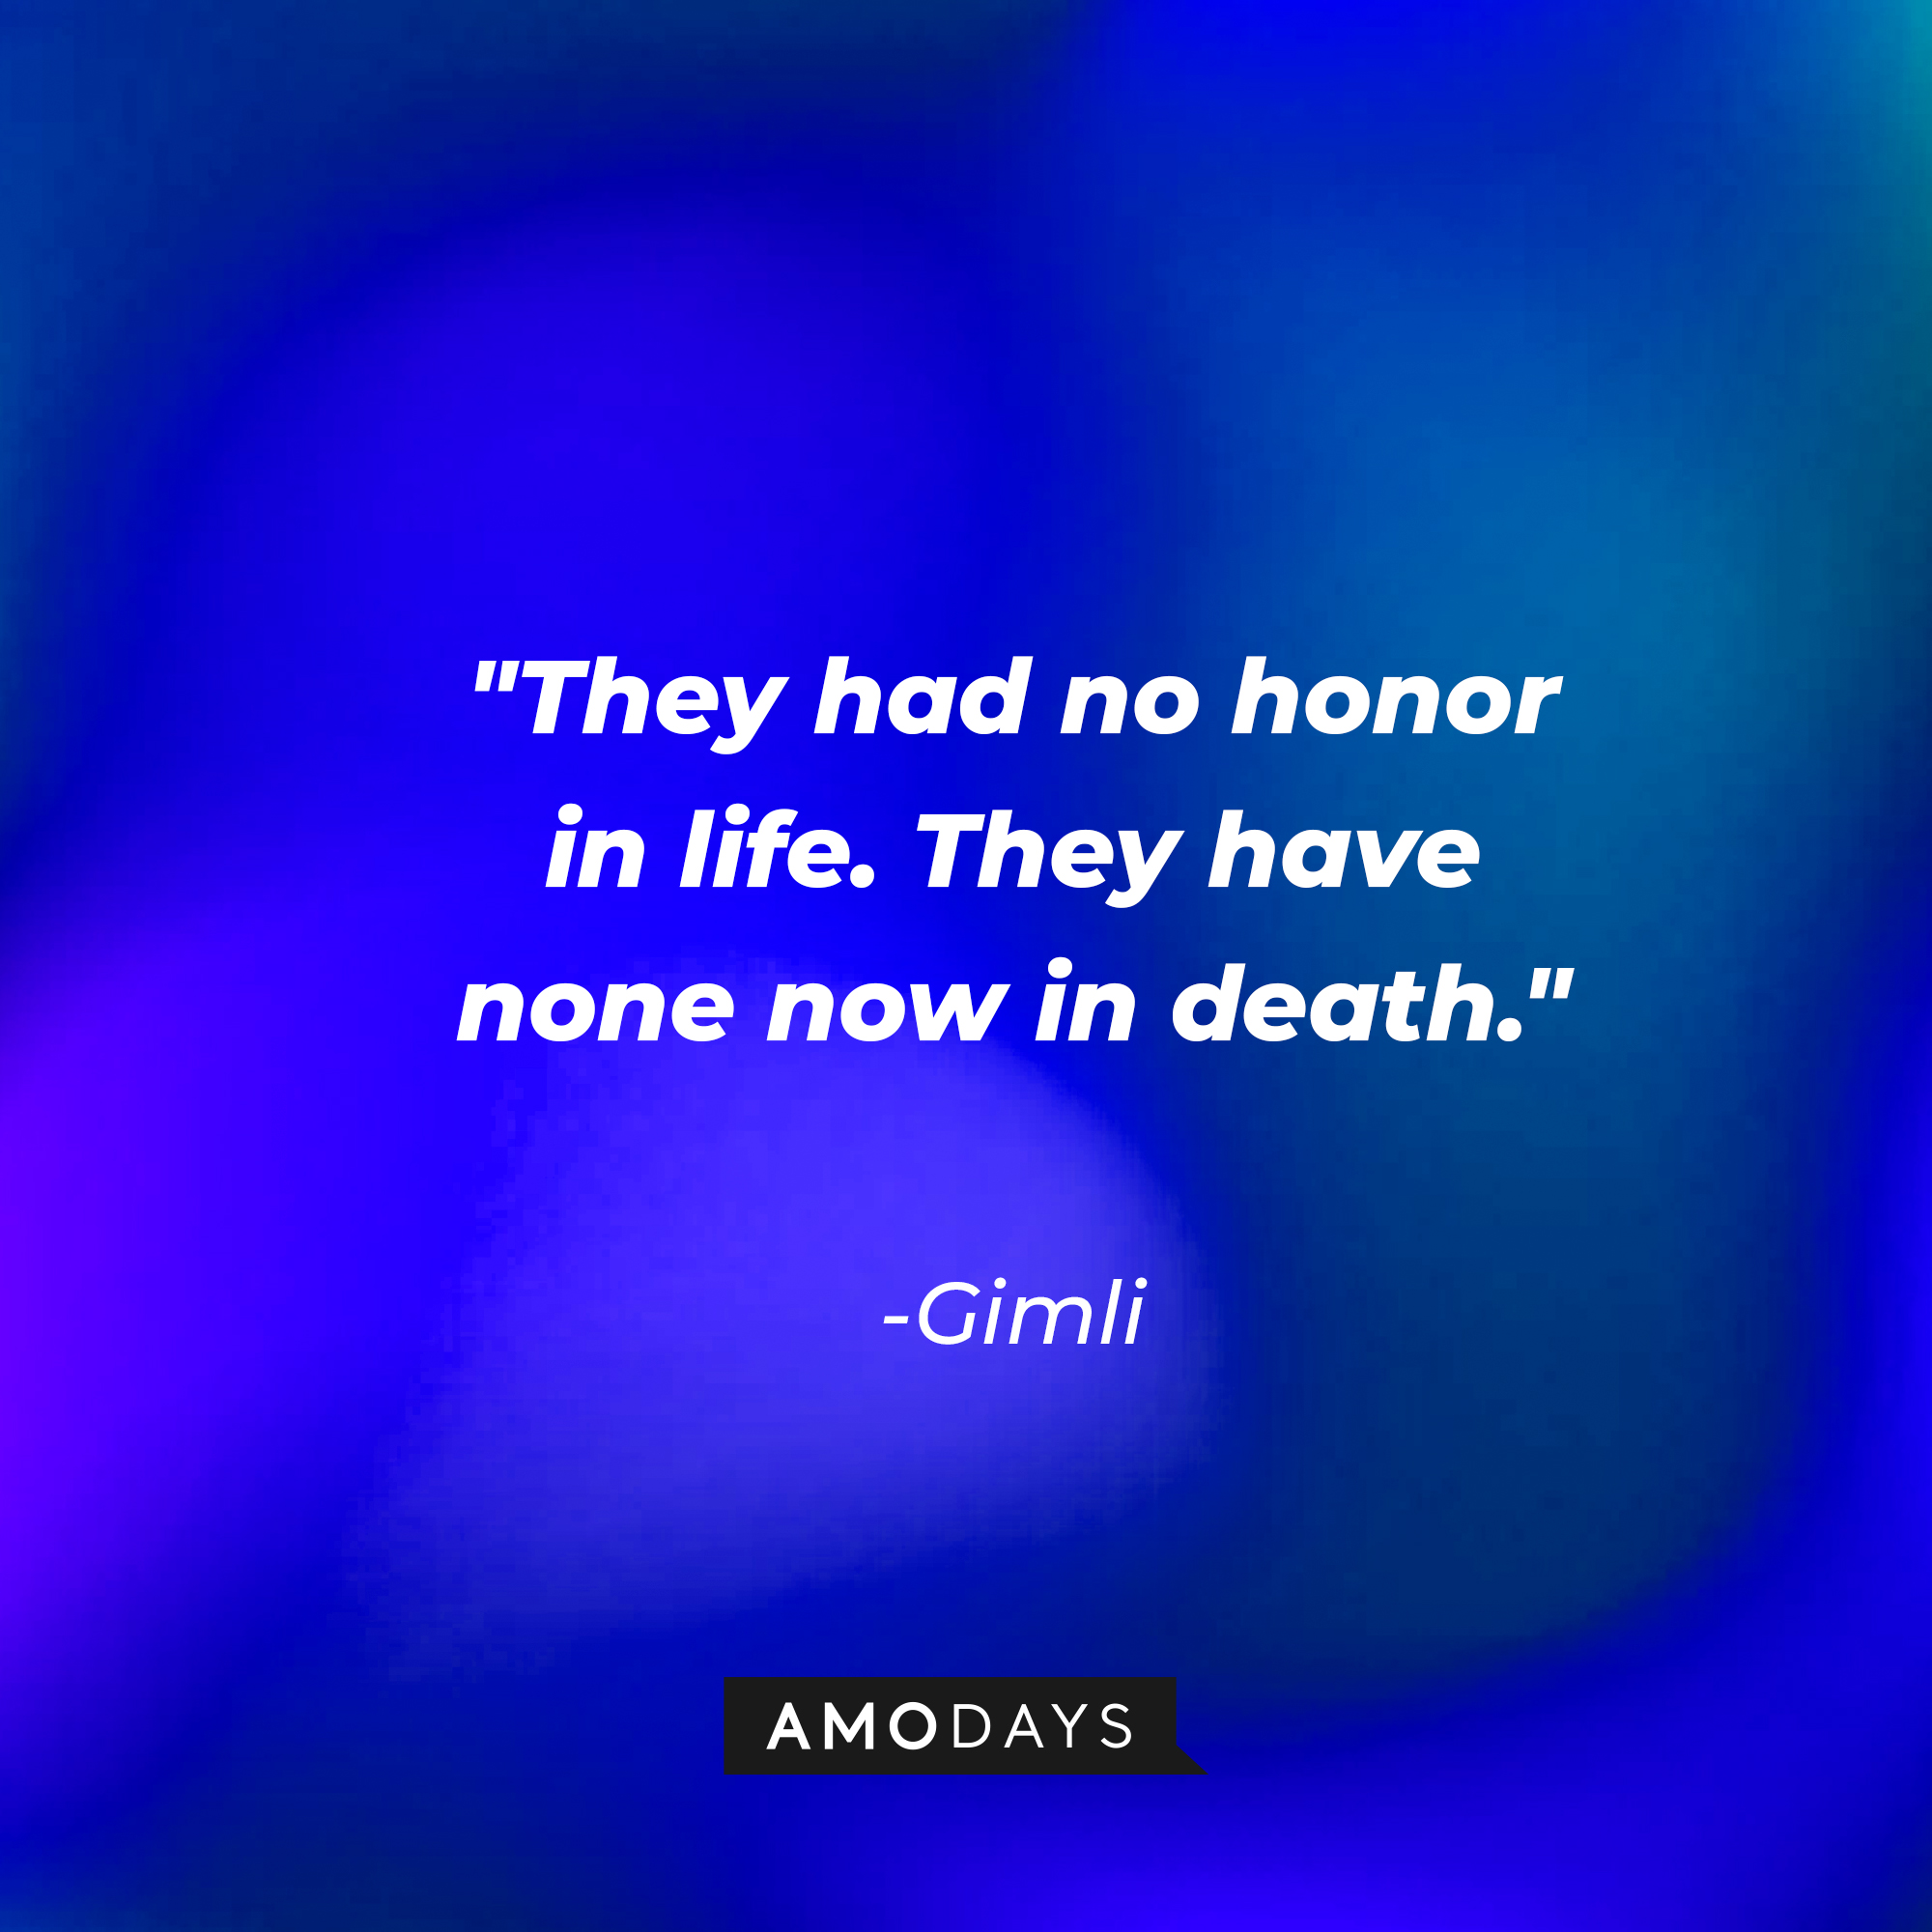 Gimli's quote: "They had no honor in life. They have none now in death." | Source: AmoDays